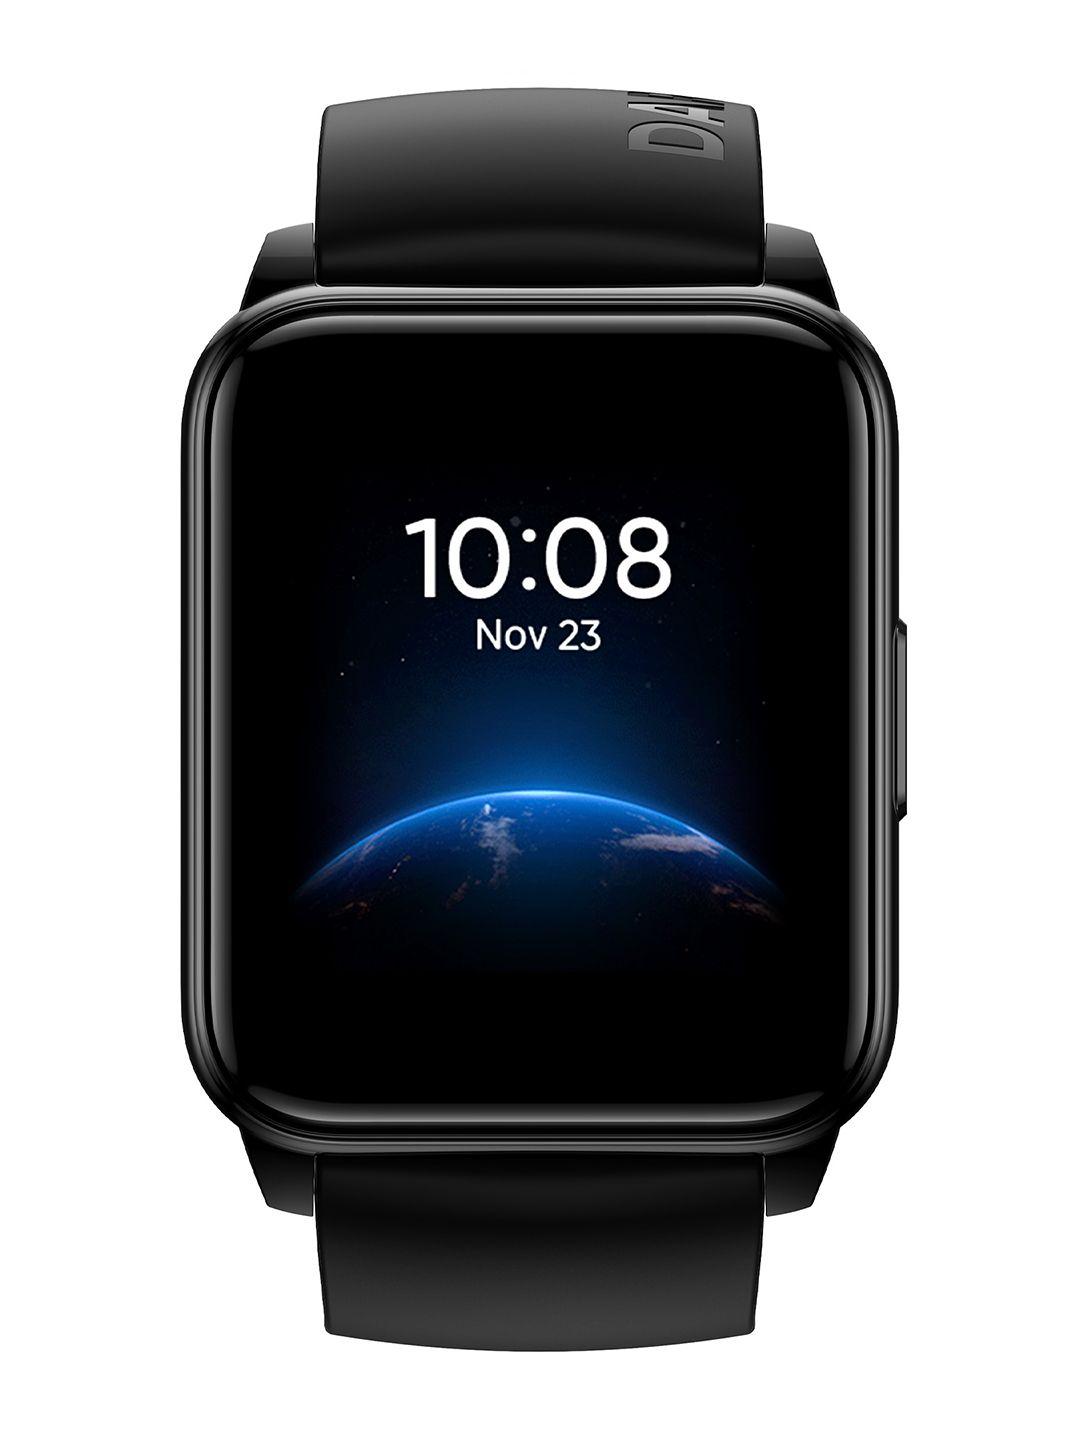 realme unisex smart watch 2 with superbright hd display & 90 sports modes